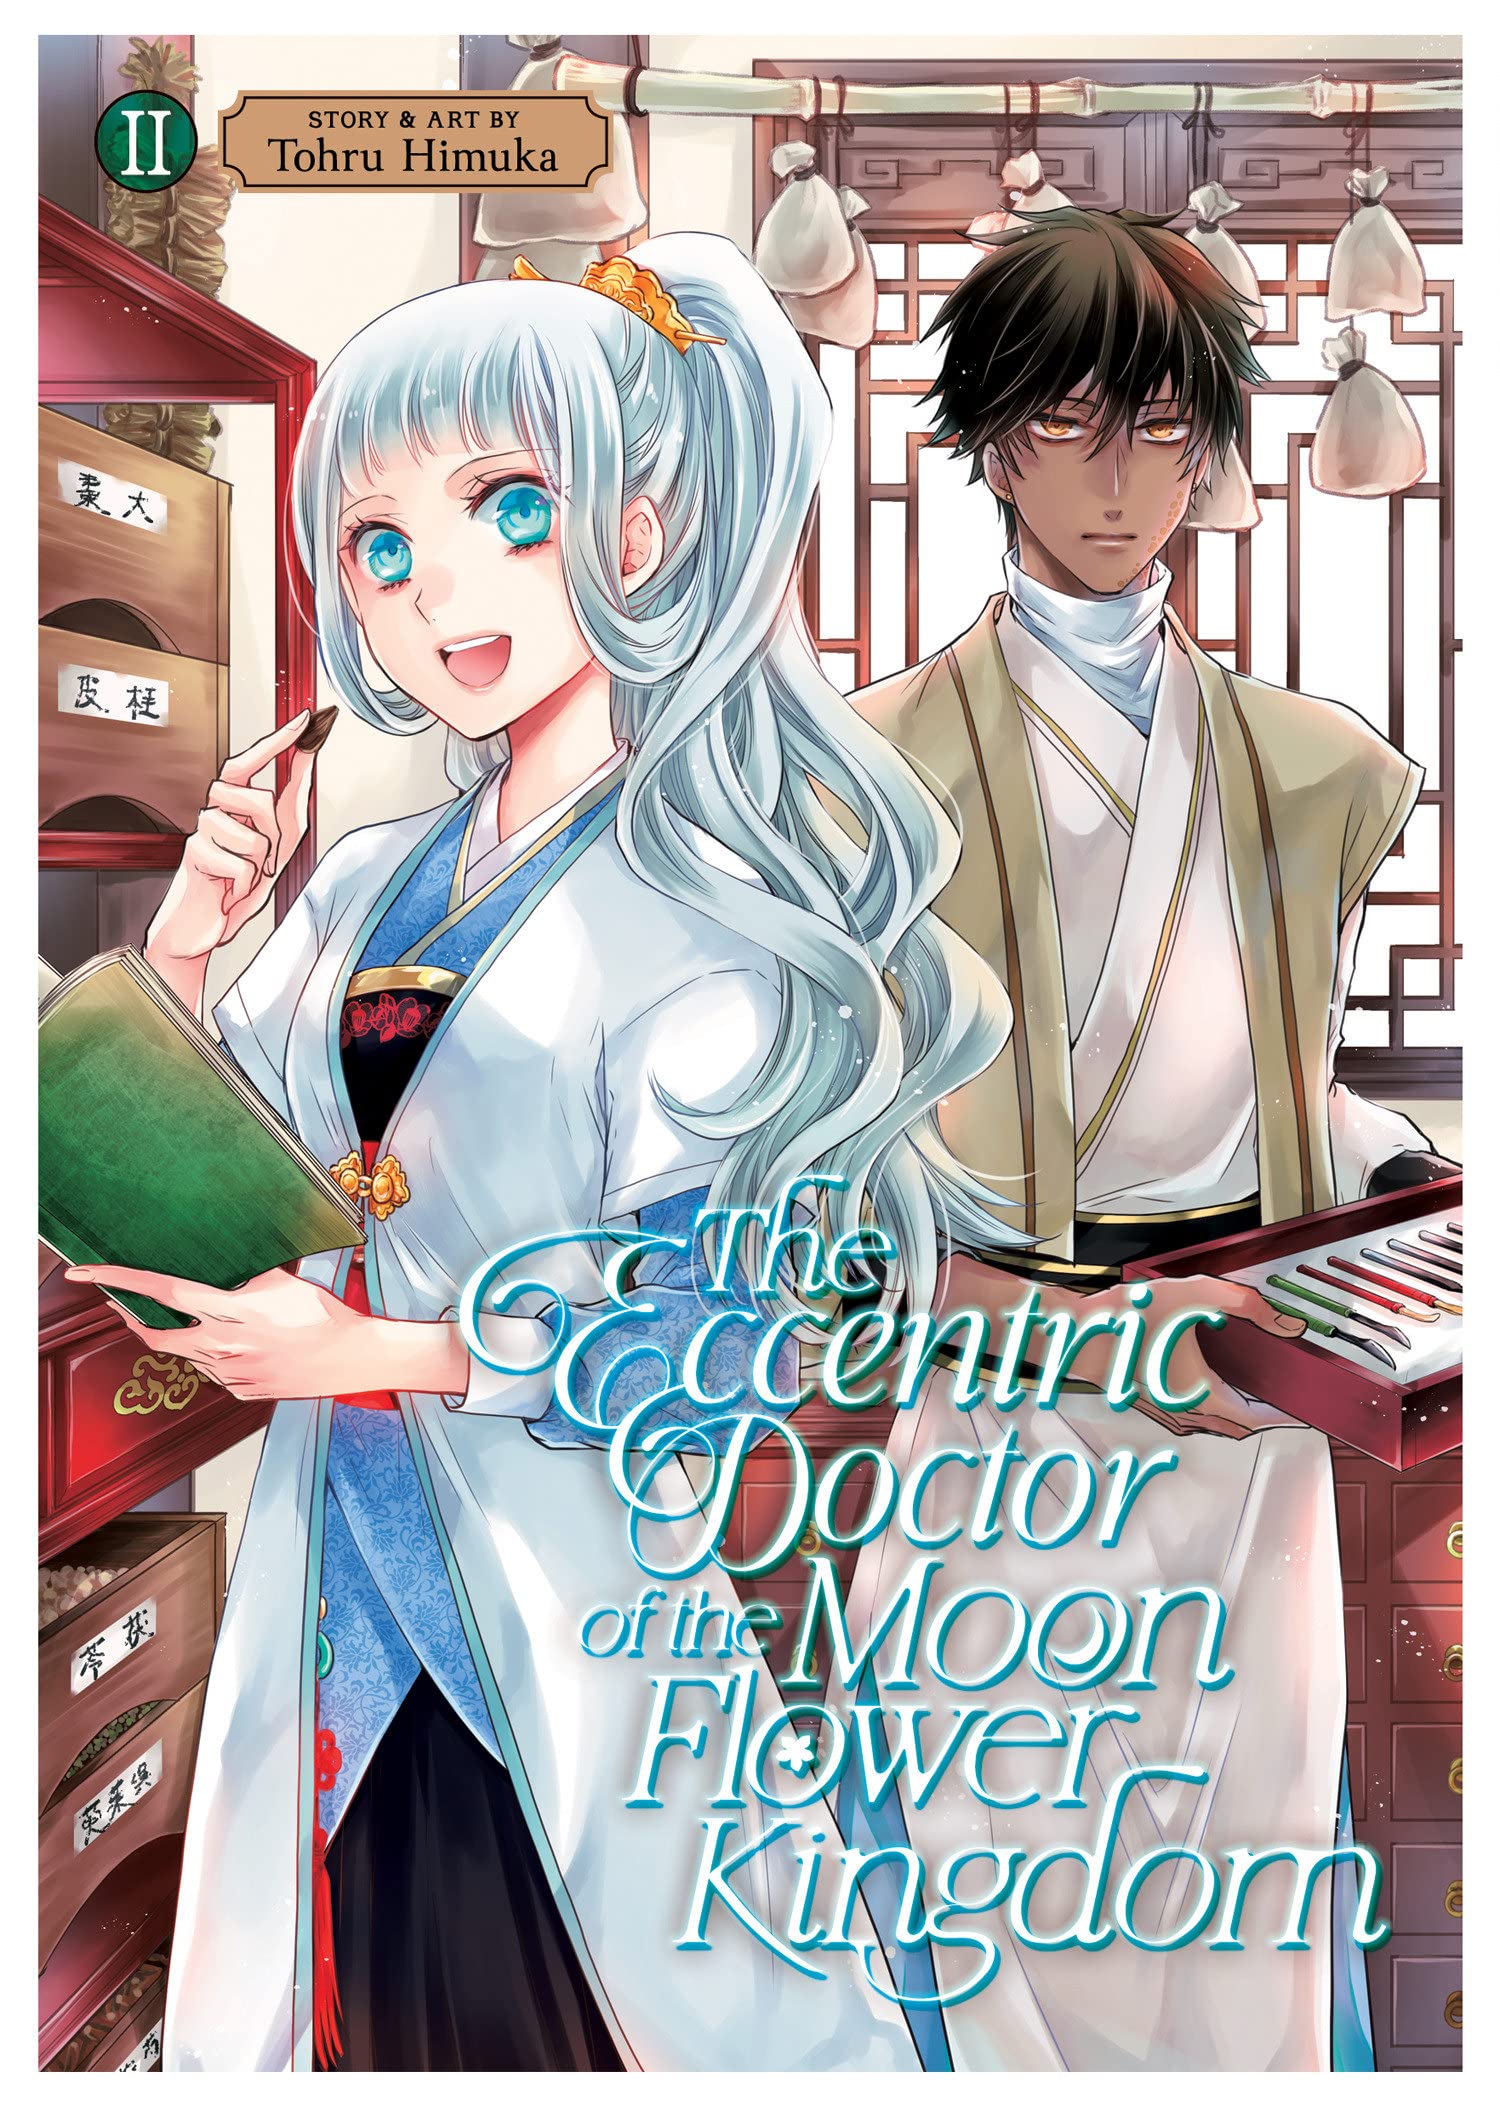 The Eccentric Doctor of the Moon Flower Kingdom Vol. 02